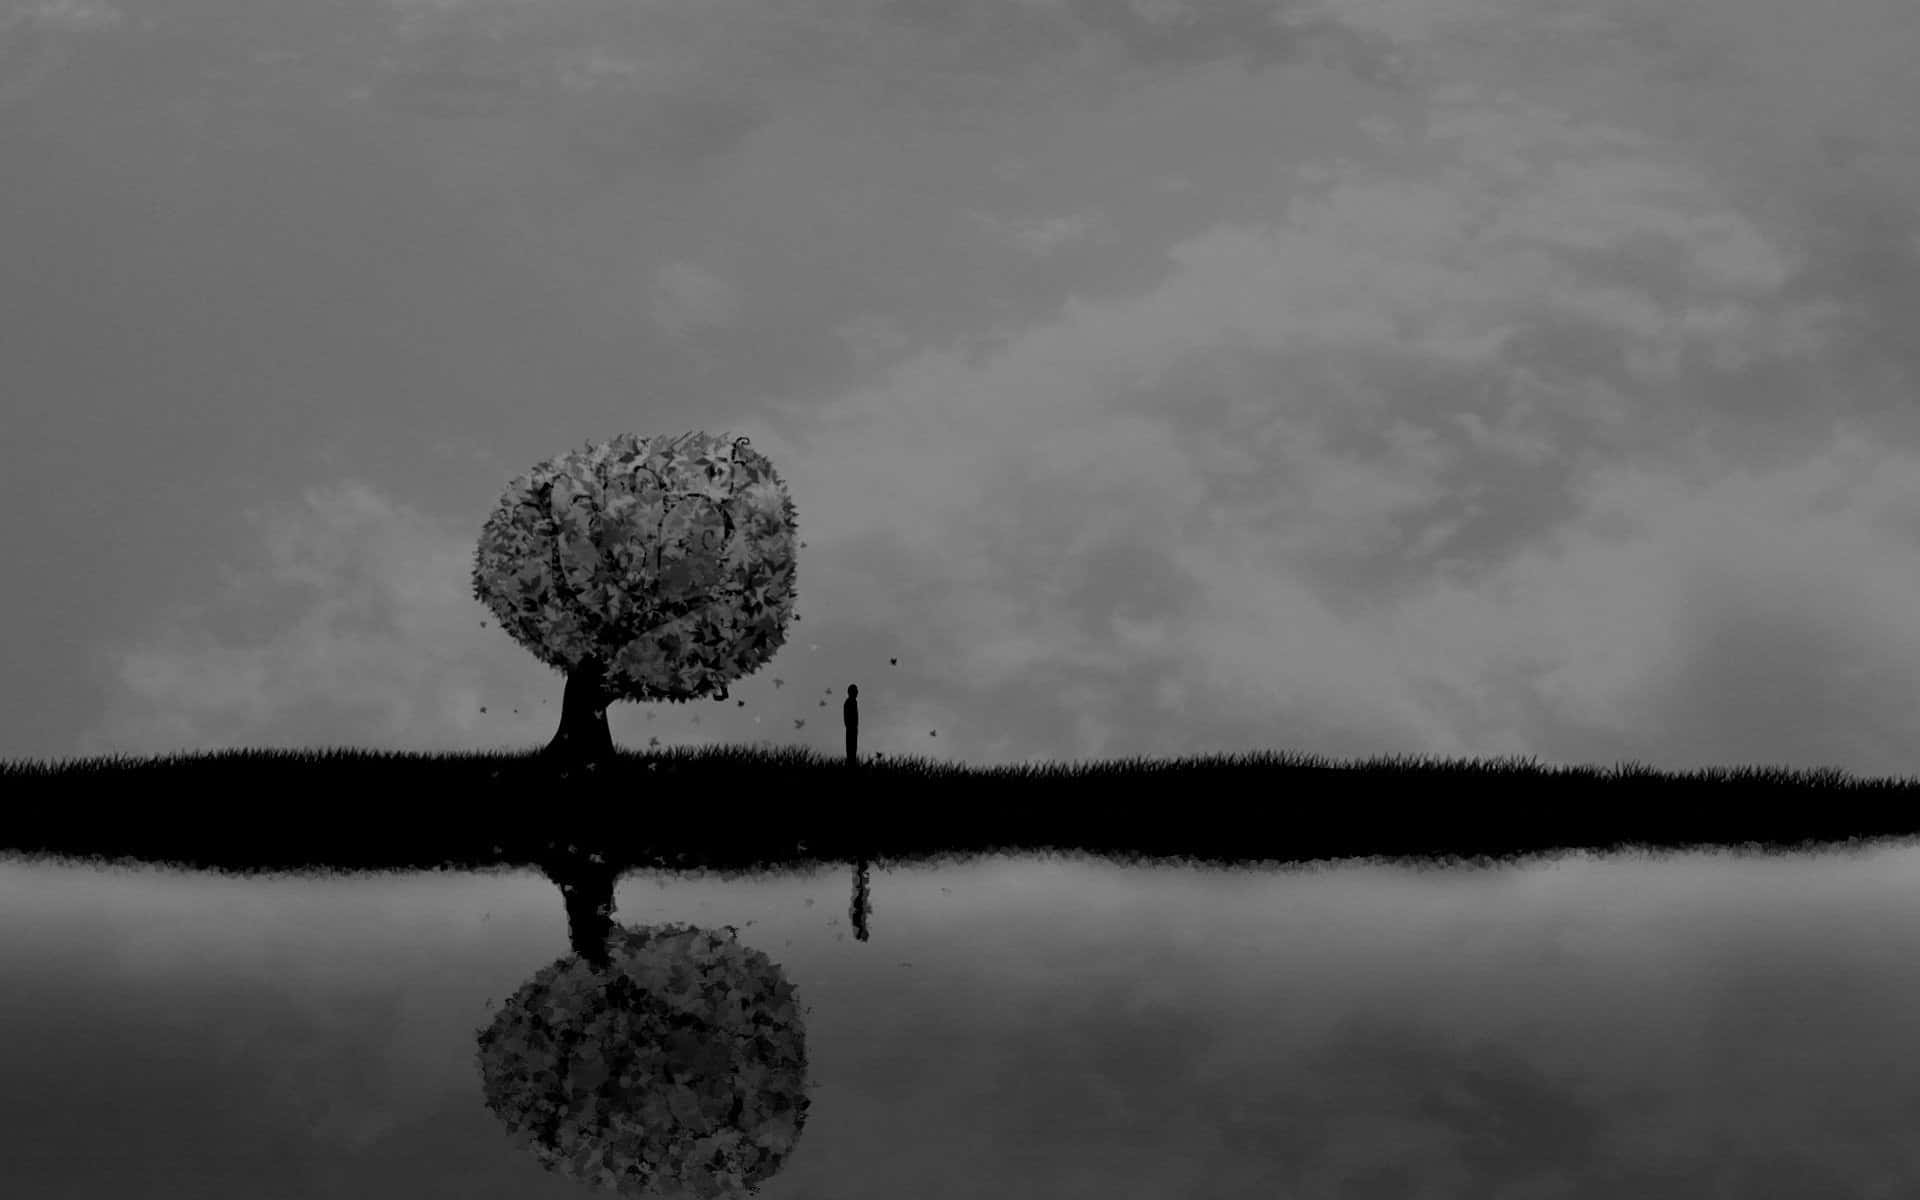 A Black And White Photo Of A Tree In The Water